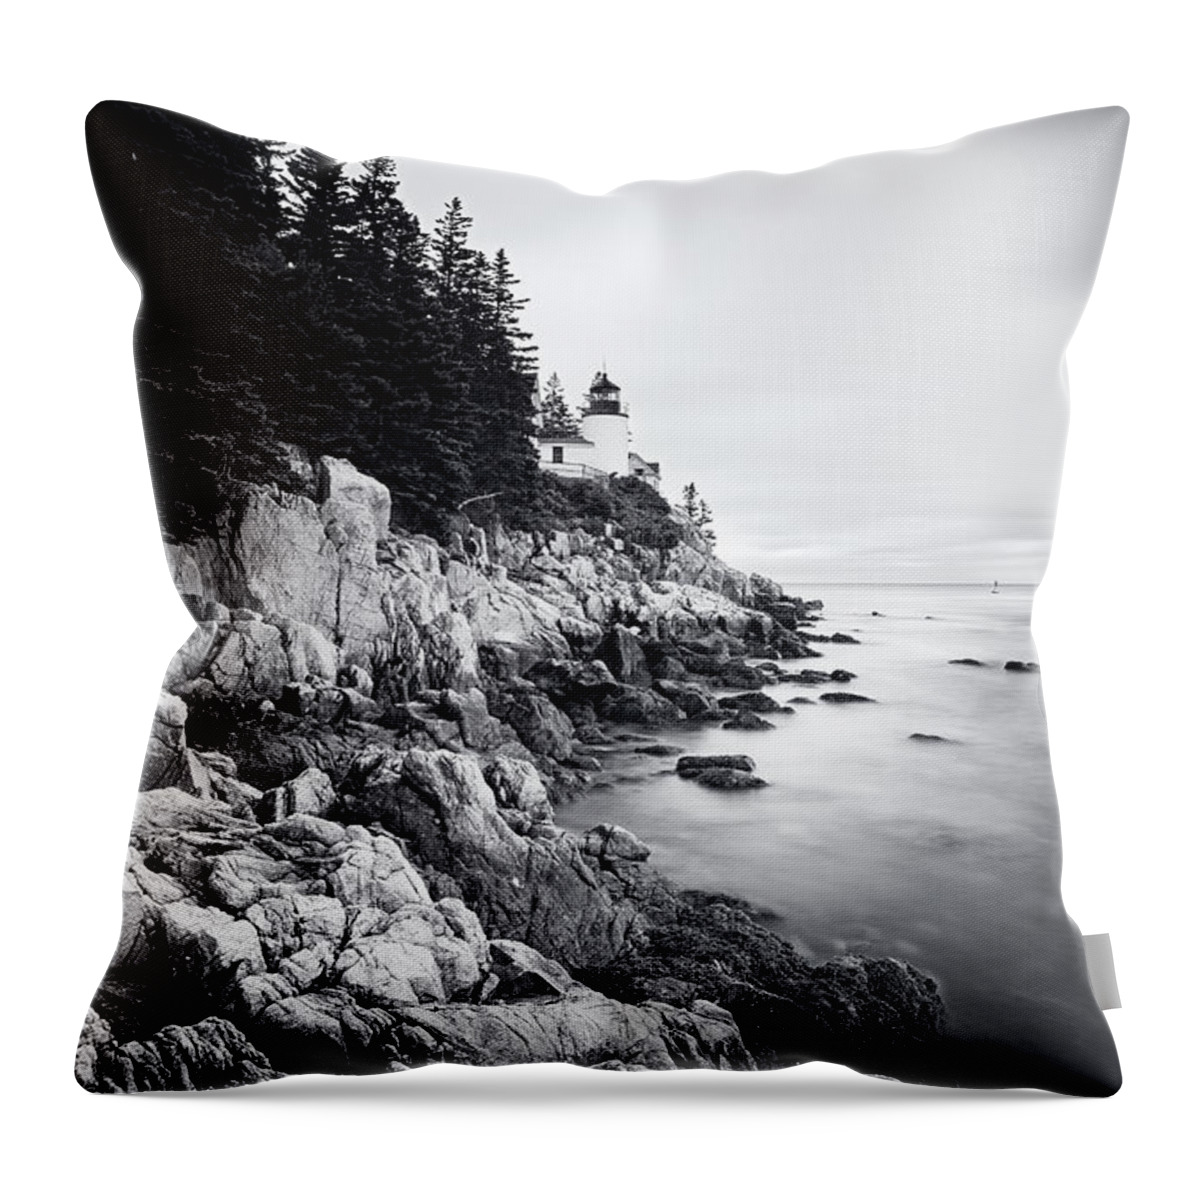 B&w Throw Pillow featuring the photograph Bass Harbor Head Light by Andy Crawford